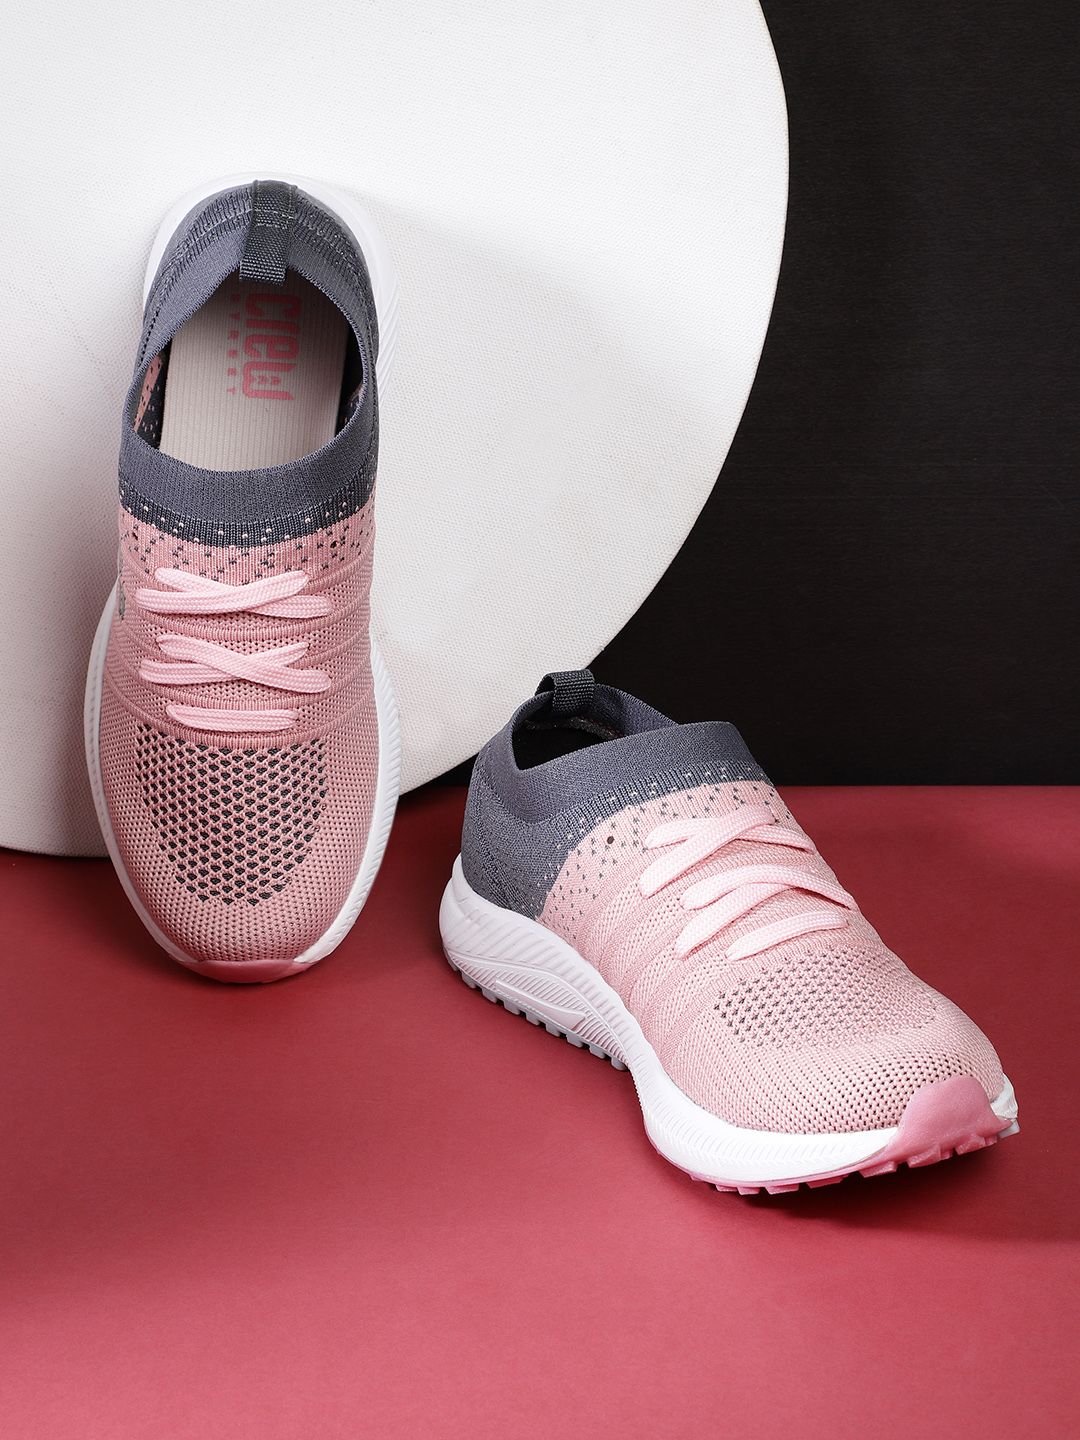 Crew STREET Women Pink & Charcoal Grey Colourblocked Running Shoes Price in India